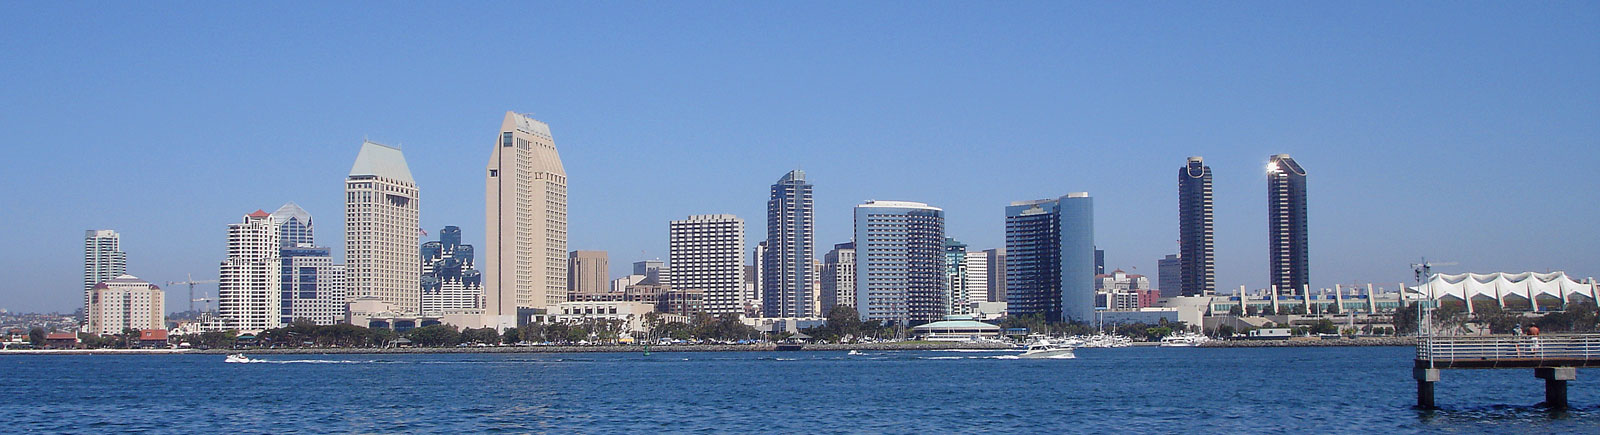 San Diego Tour Package at California Hotel